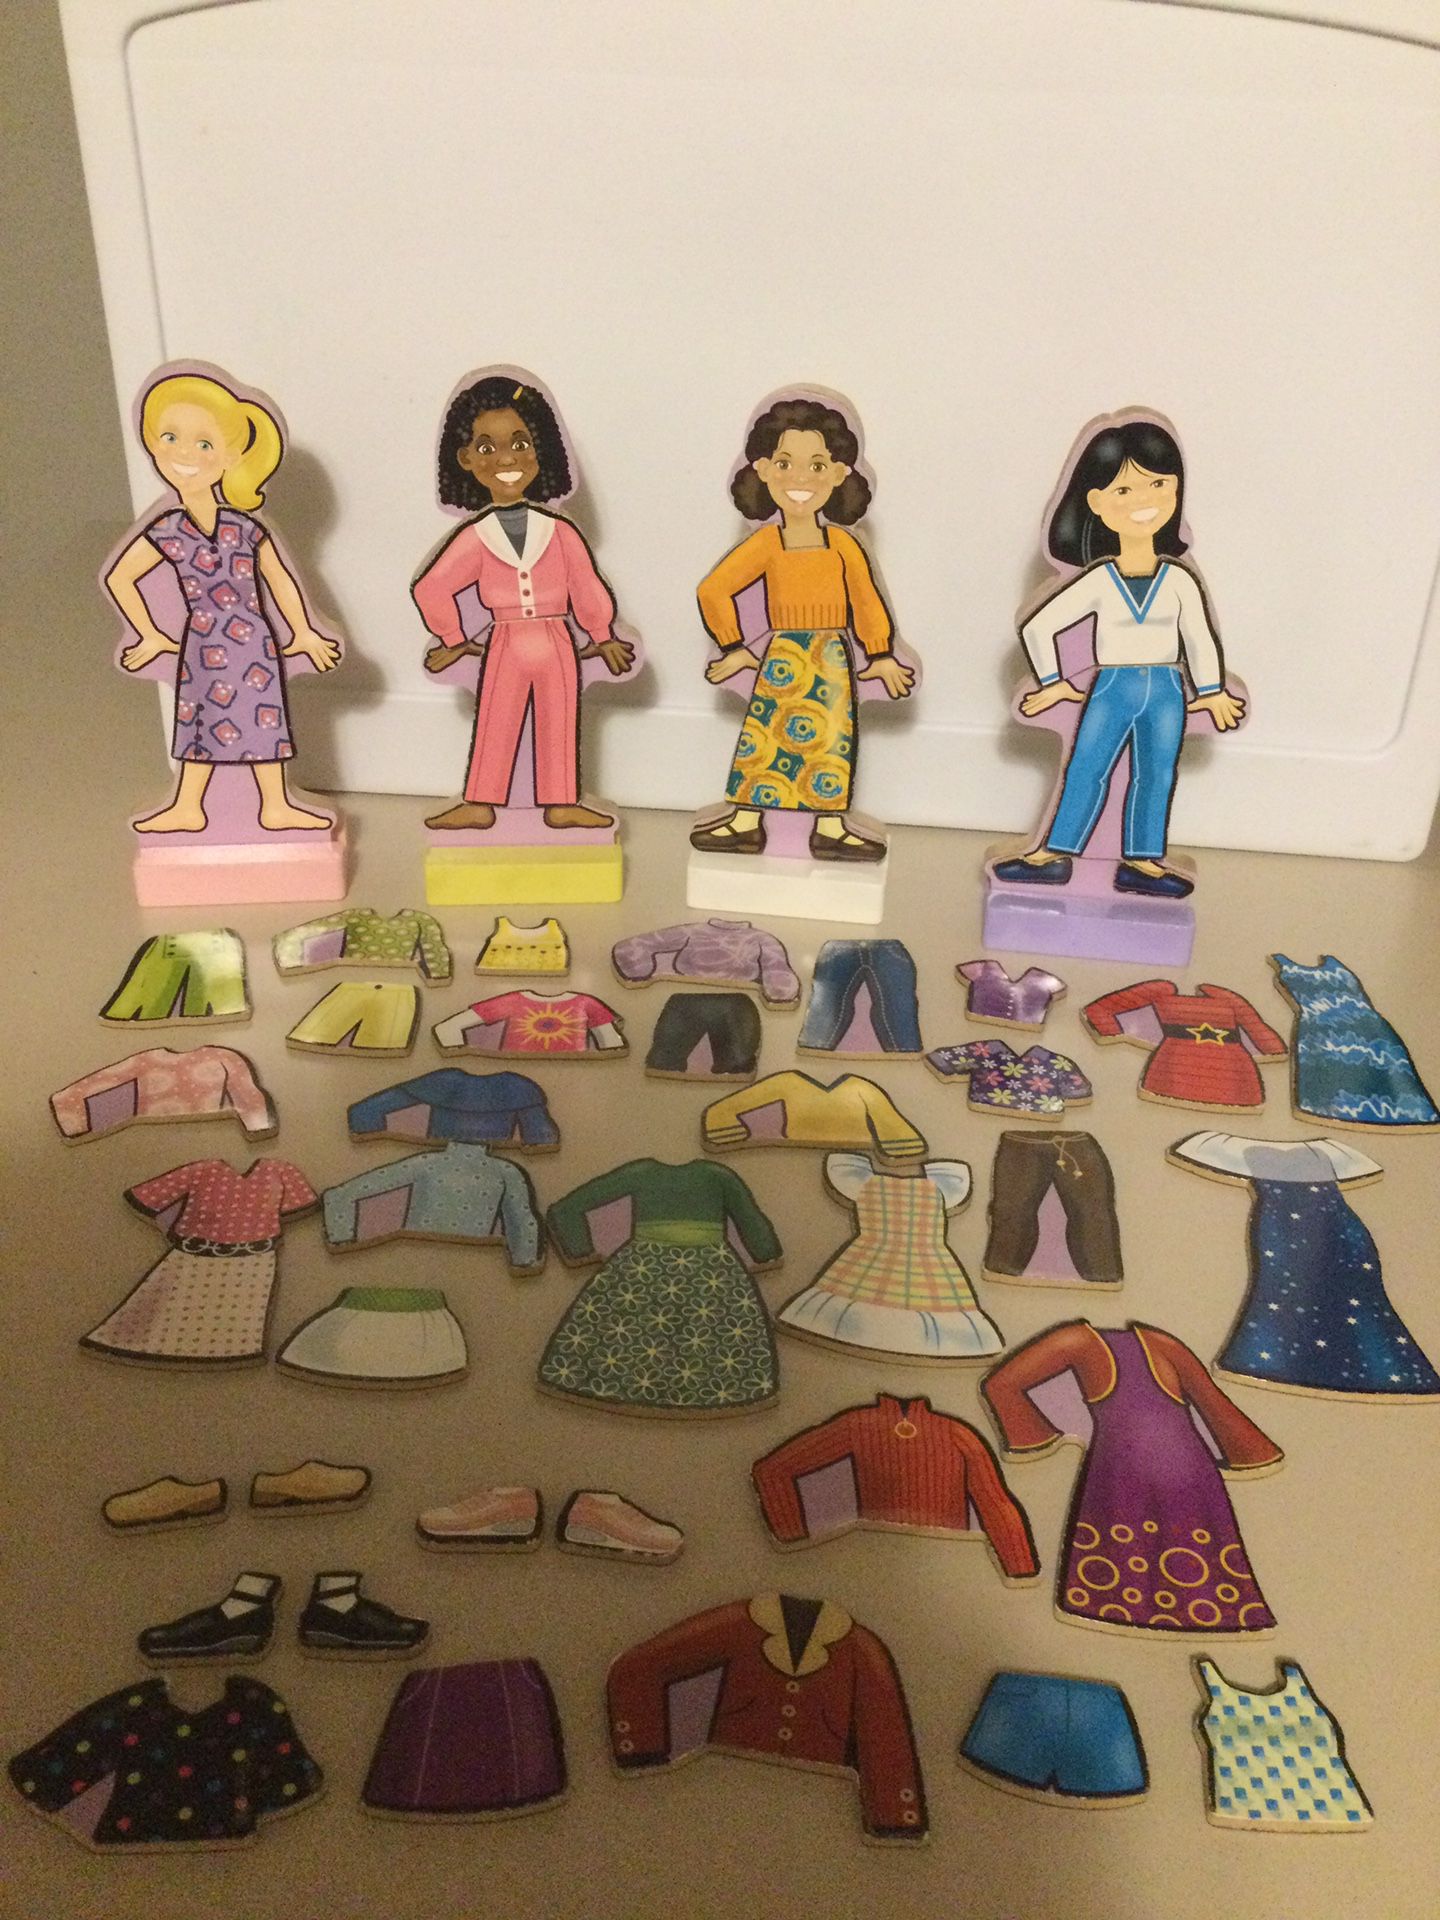 Wooden dolls 7.5” tall  and magnetic clothing more than 40 pieces